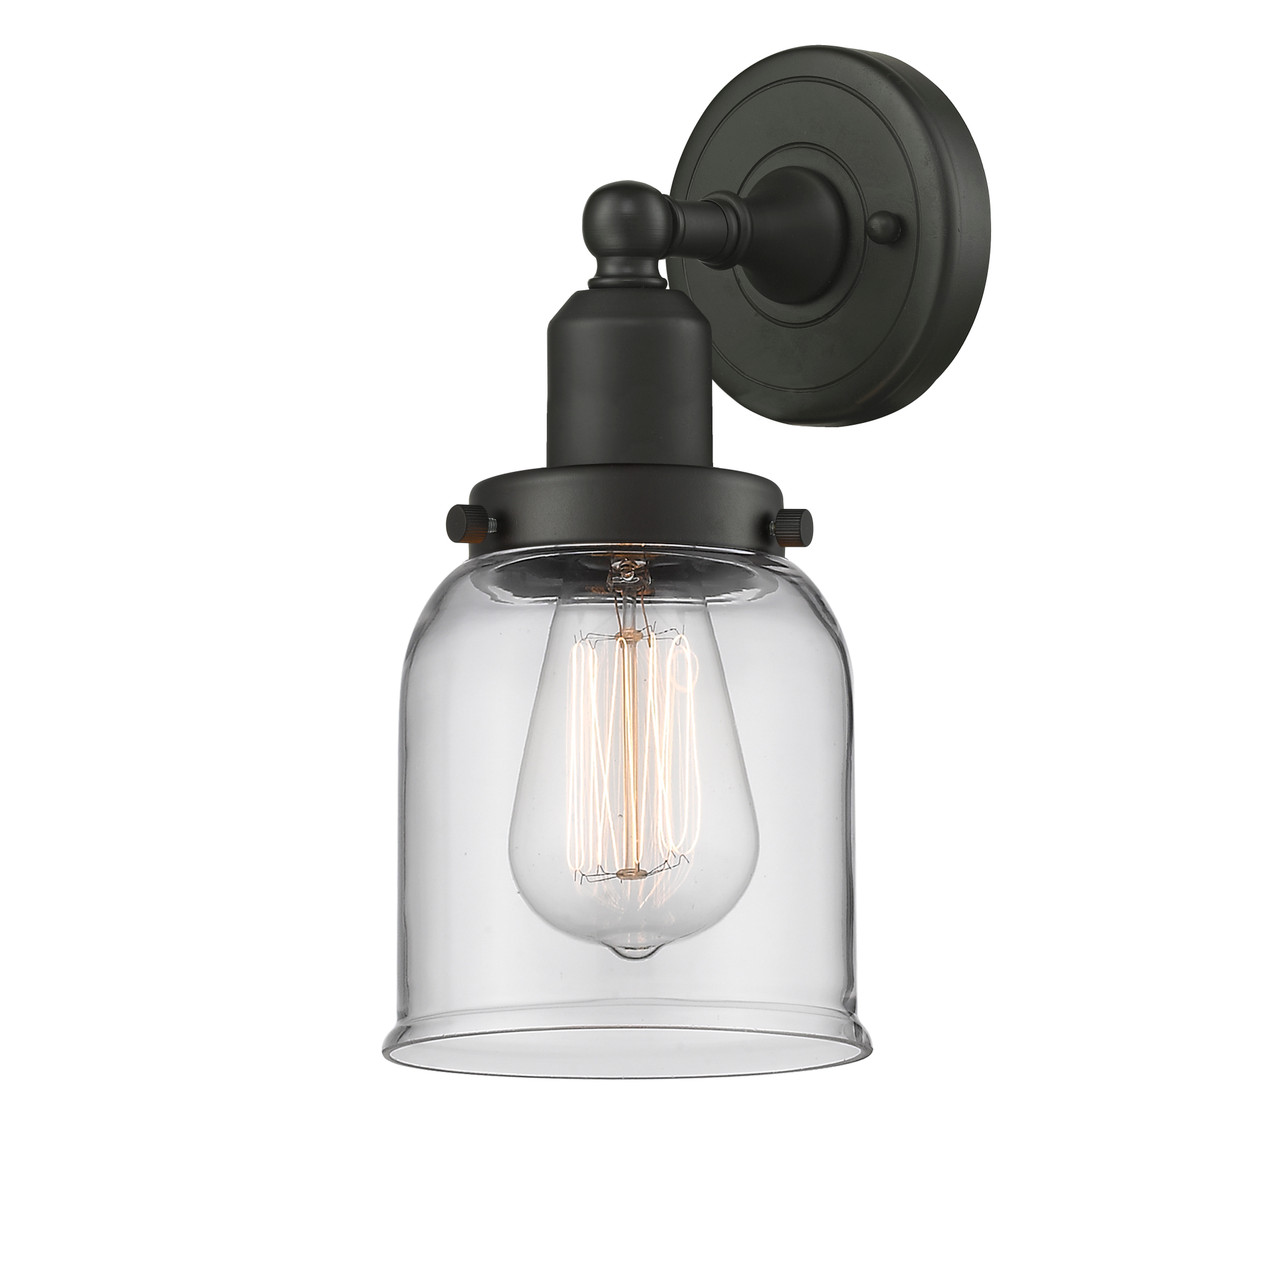 INNOVATIONS 900H-1W-OB-G52-LED Small Bell 1 Light Bath Vanity Light part of the Austere Collection Oil Rubbed Bronze